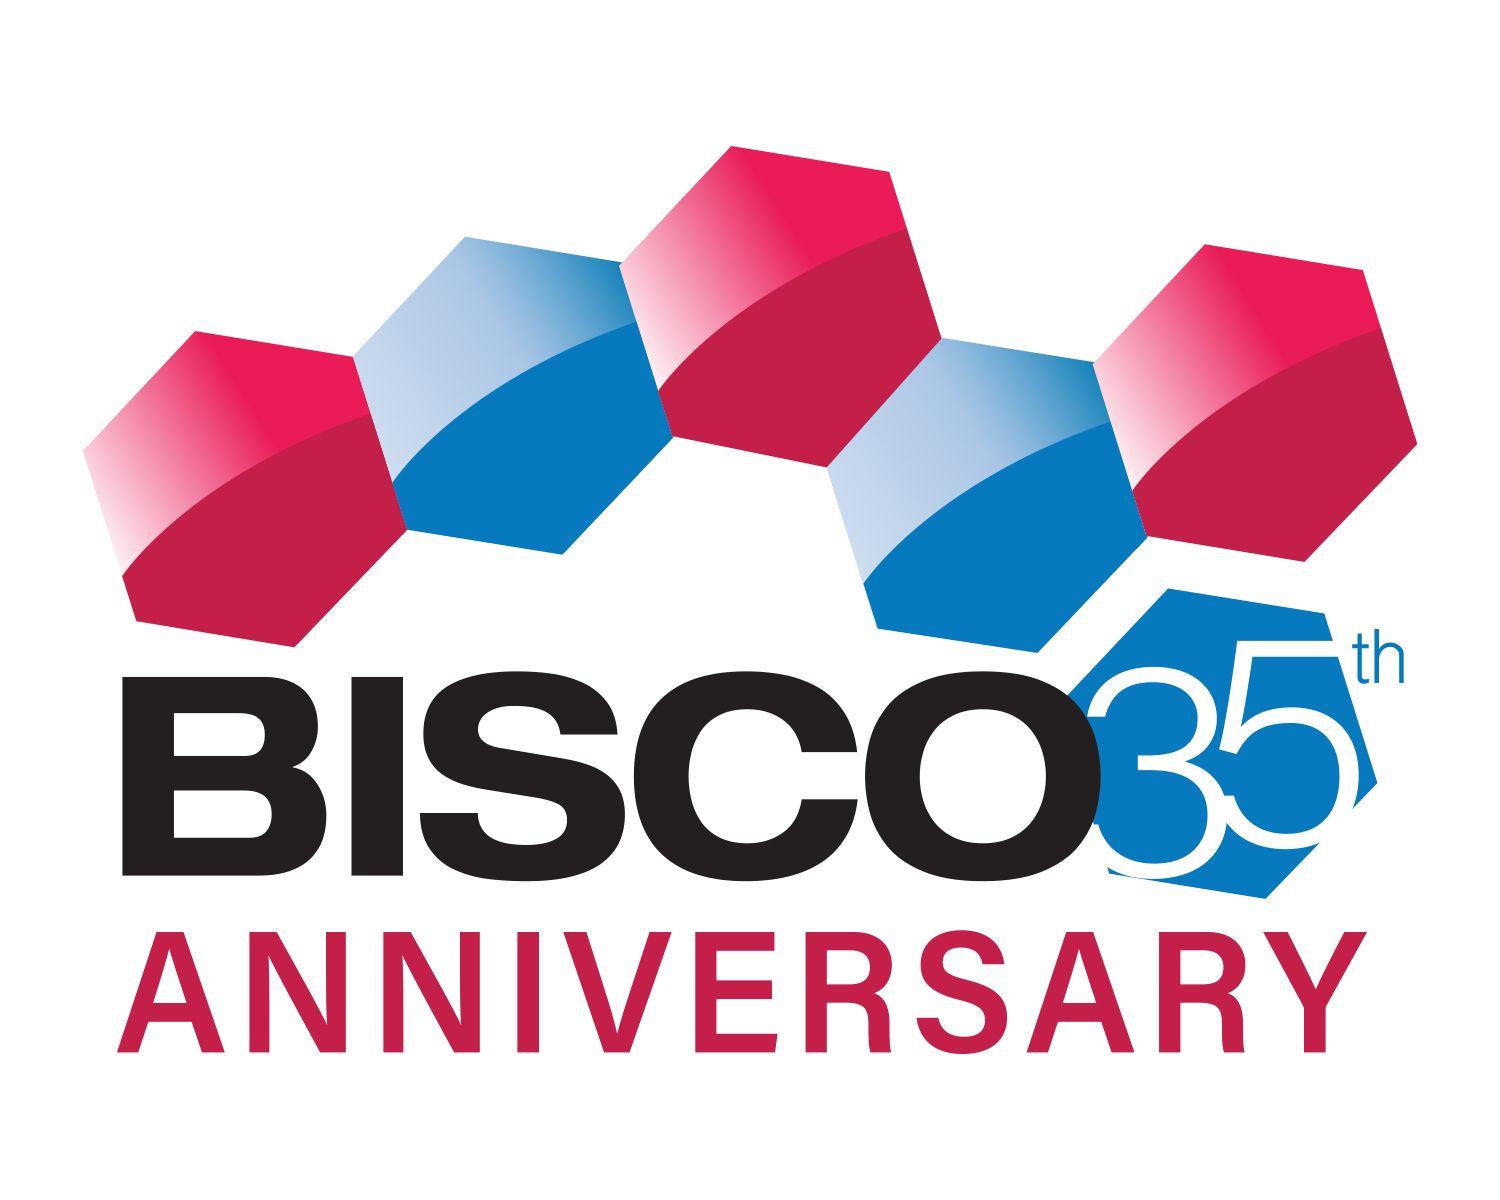 Bisco Logo - BISCO 35 Years of Dental Excellence | Restorative | Cosmetic